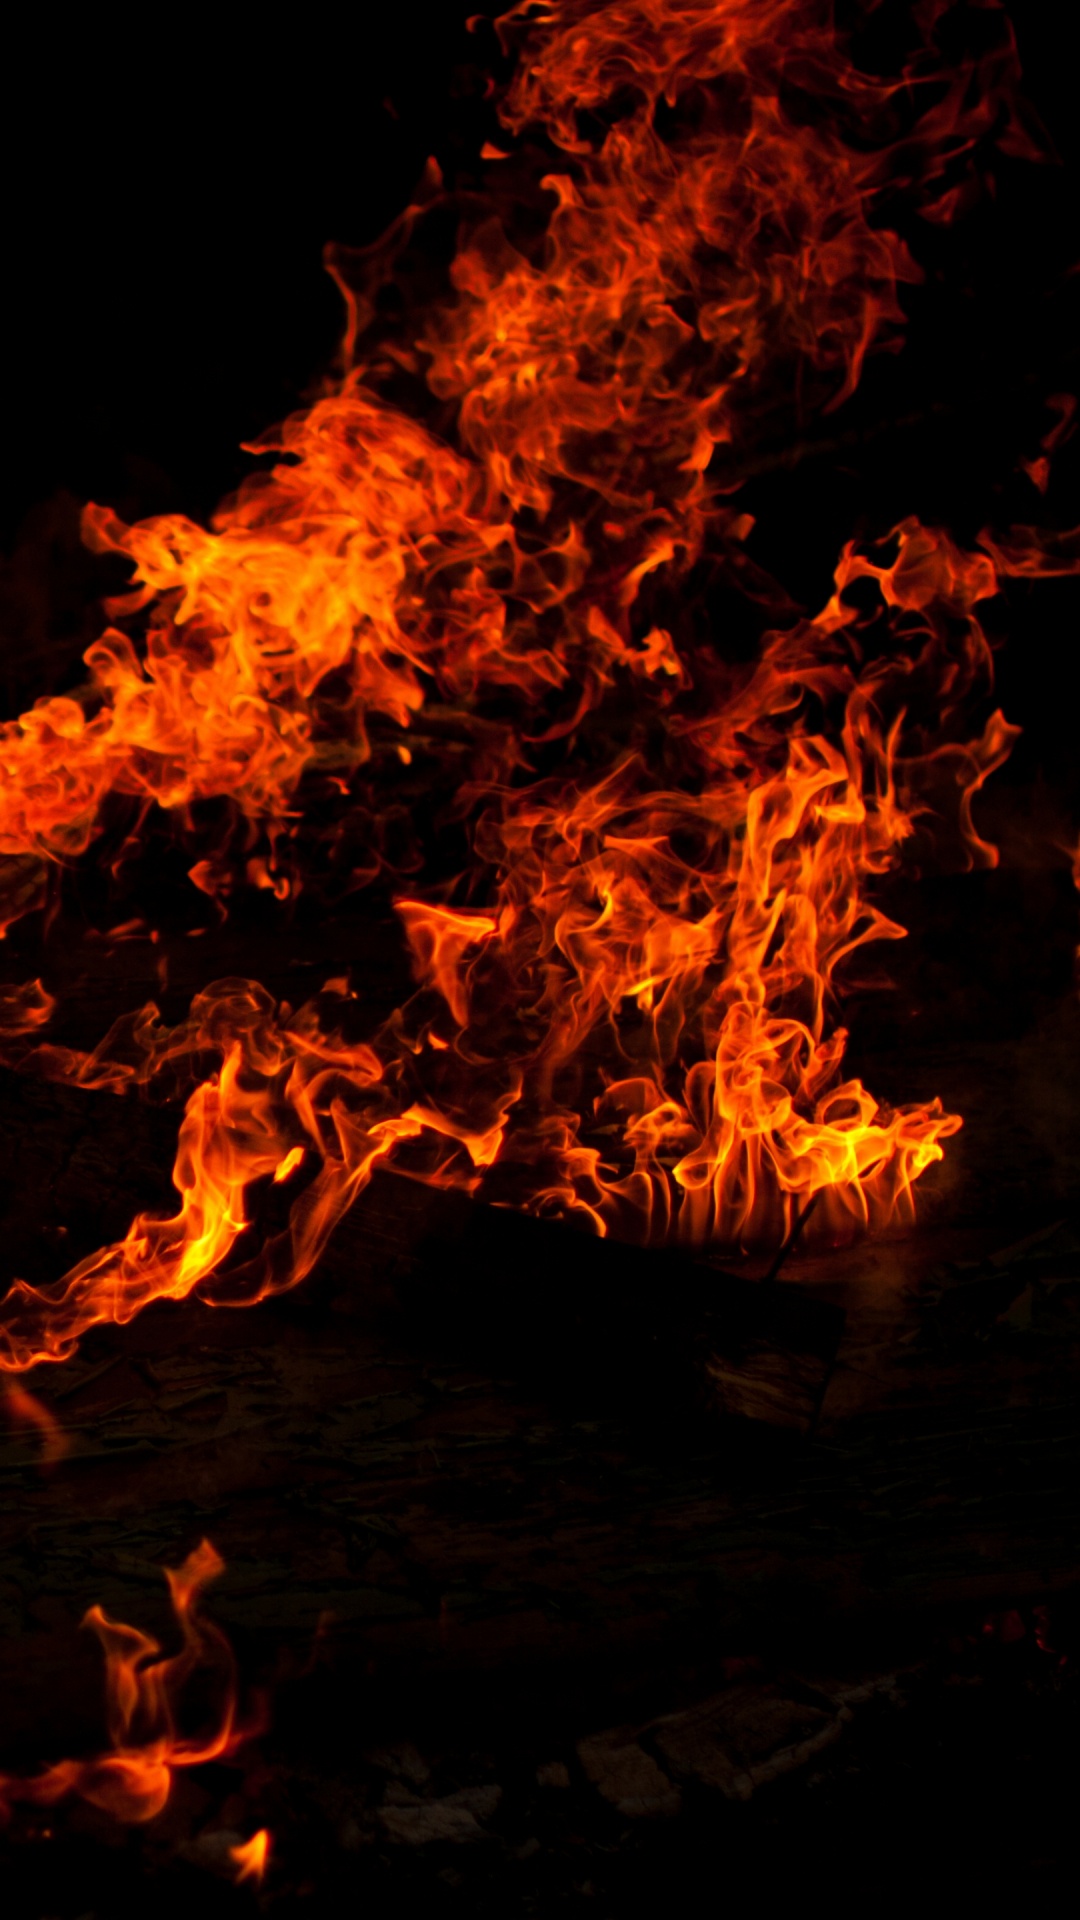 Fire on Fire During Night Time. Wallpaper in 1080x1920 Resolution